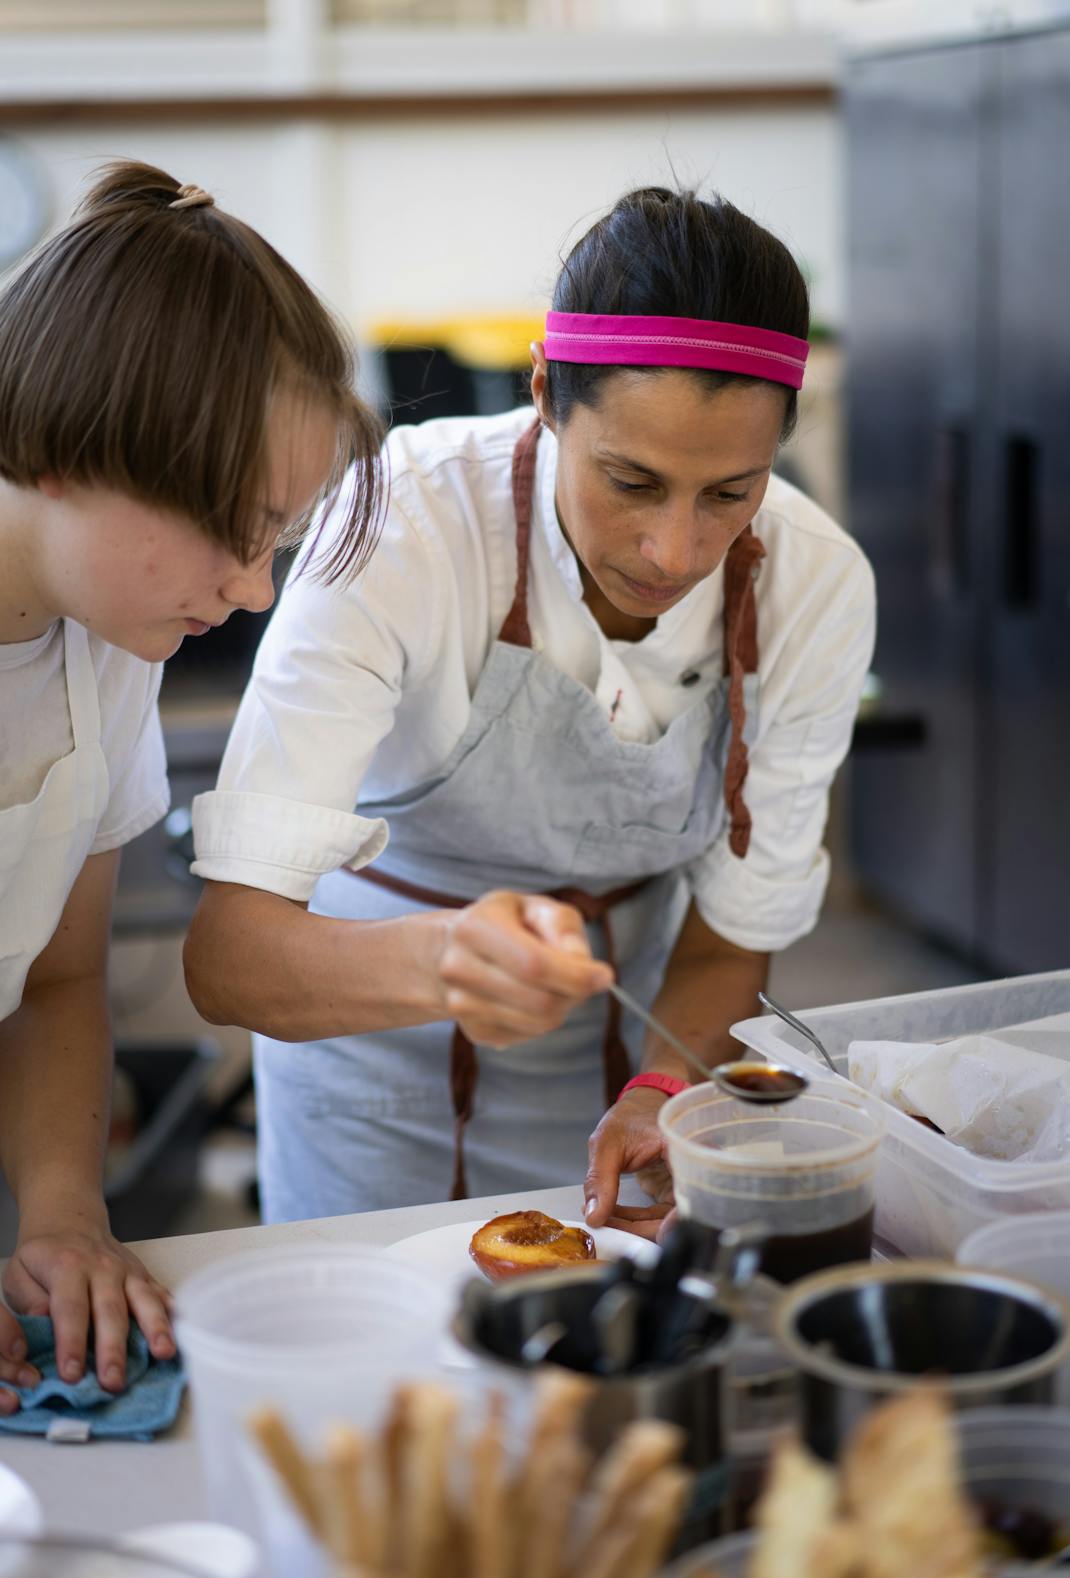 Why Pastry Chefs Are Disappearing From Restaurants